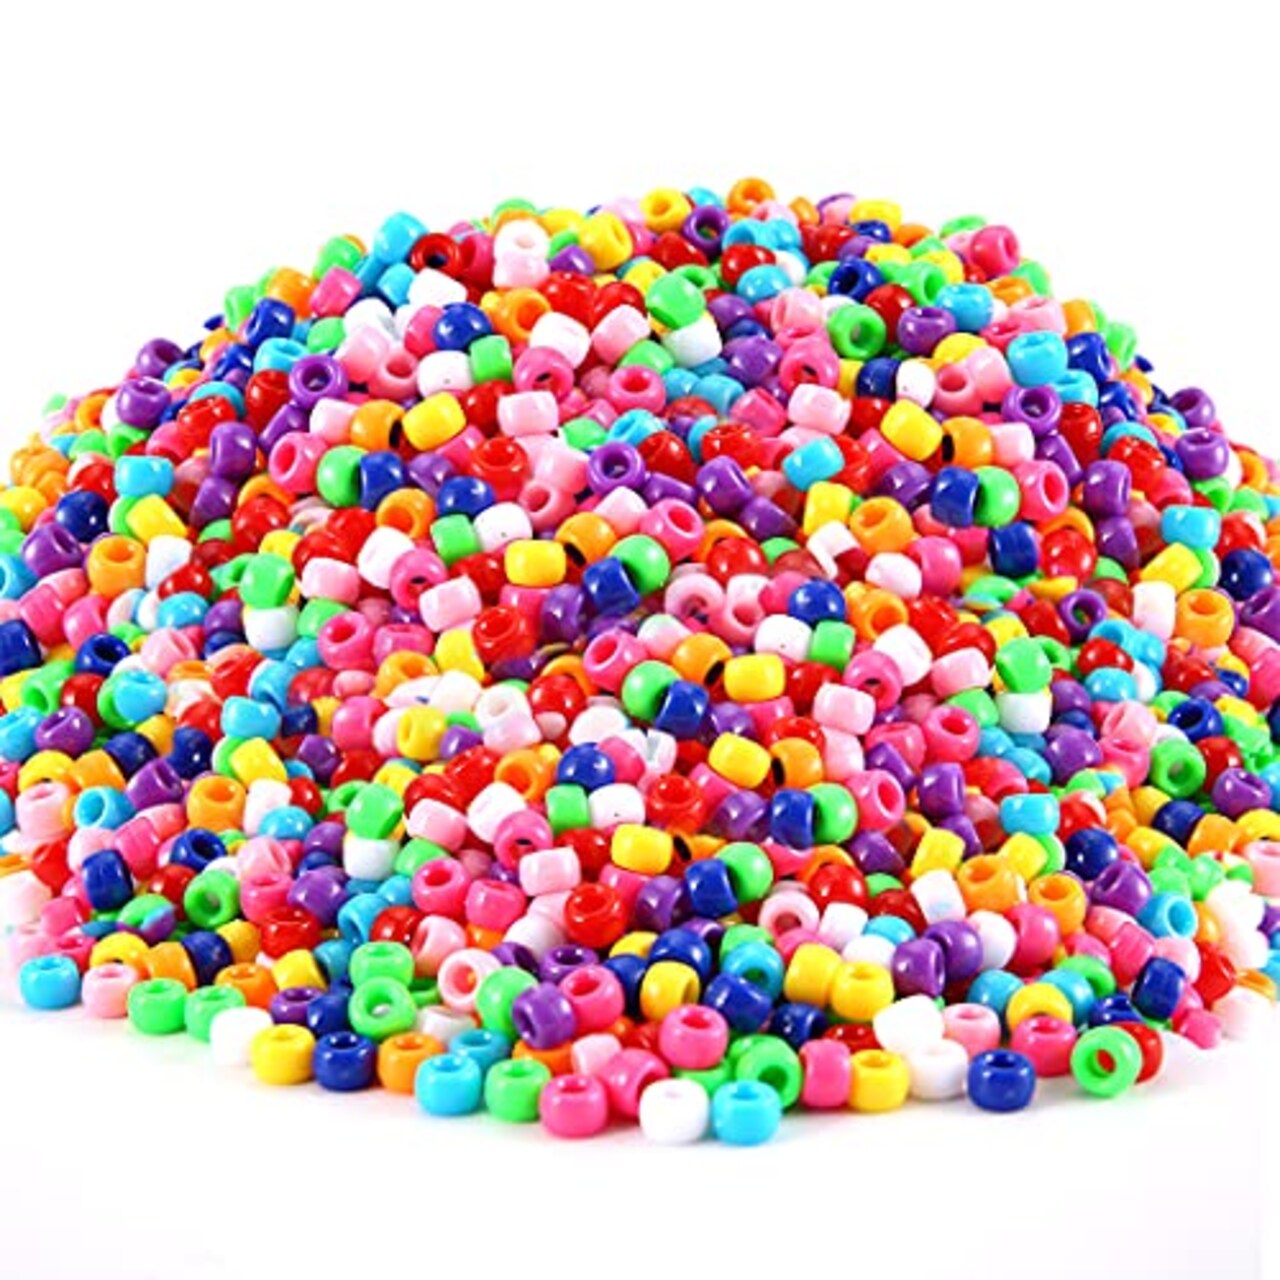 3000+ pcs Pony Beads, Multi-Colored Bracelet Beads, Beads for Hair Braids, Beads  for Crafts, Plastic Beads, Hair Beads for Braids (Large Pack, Classic)…